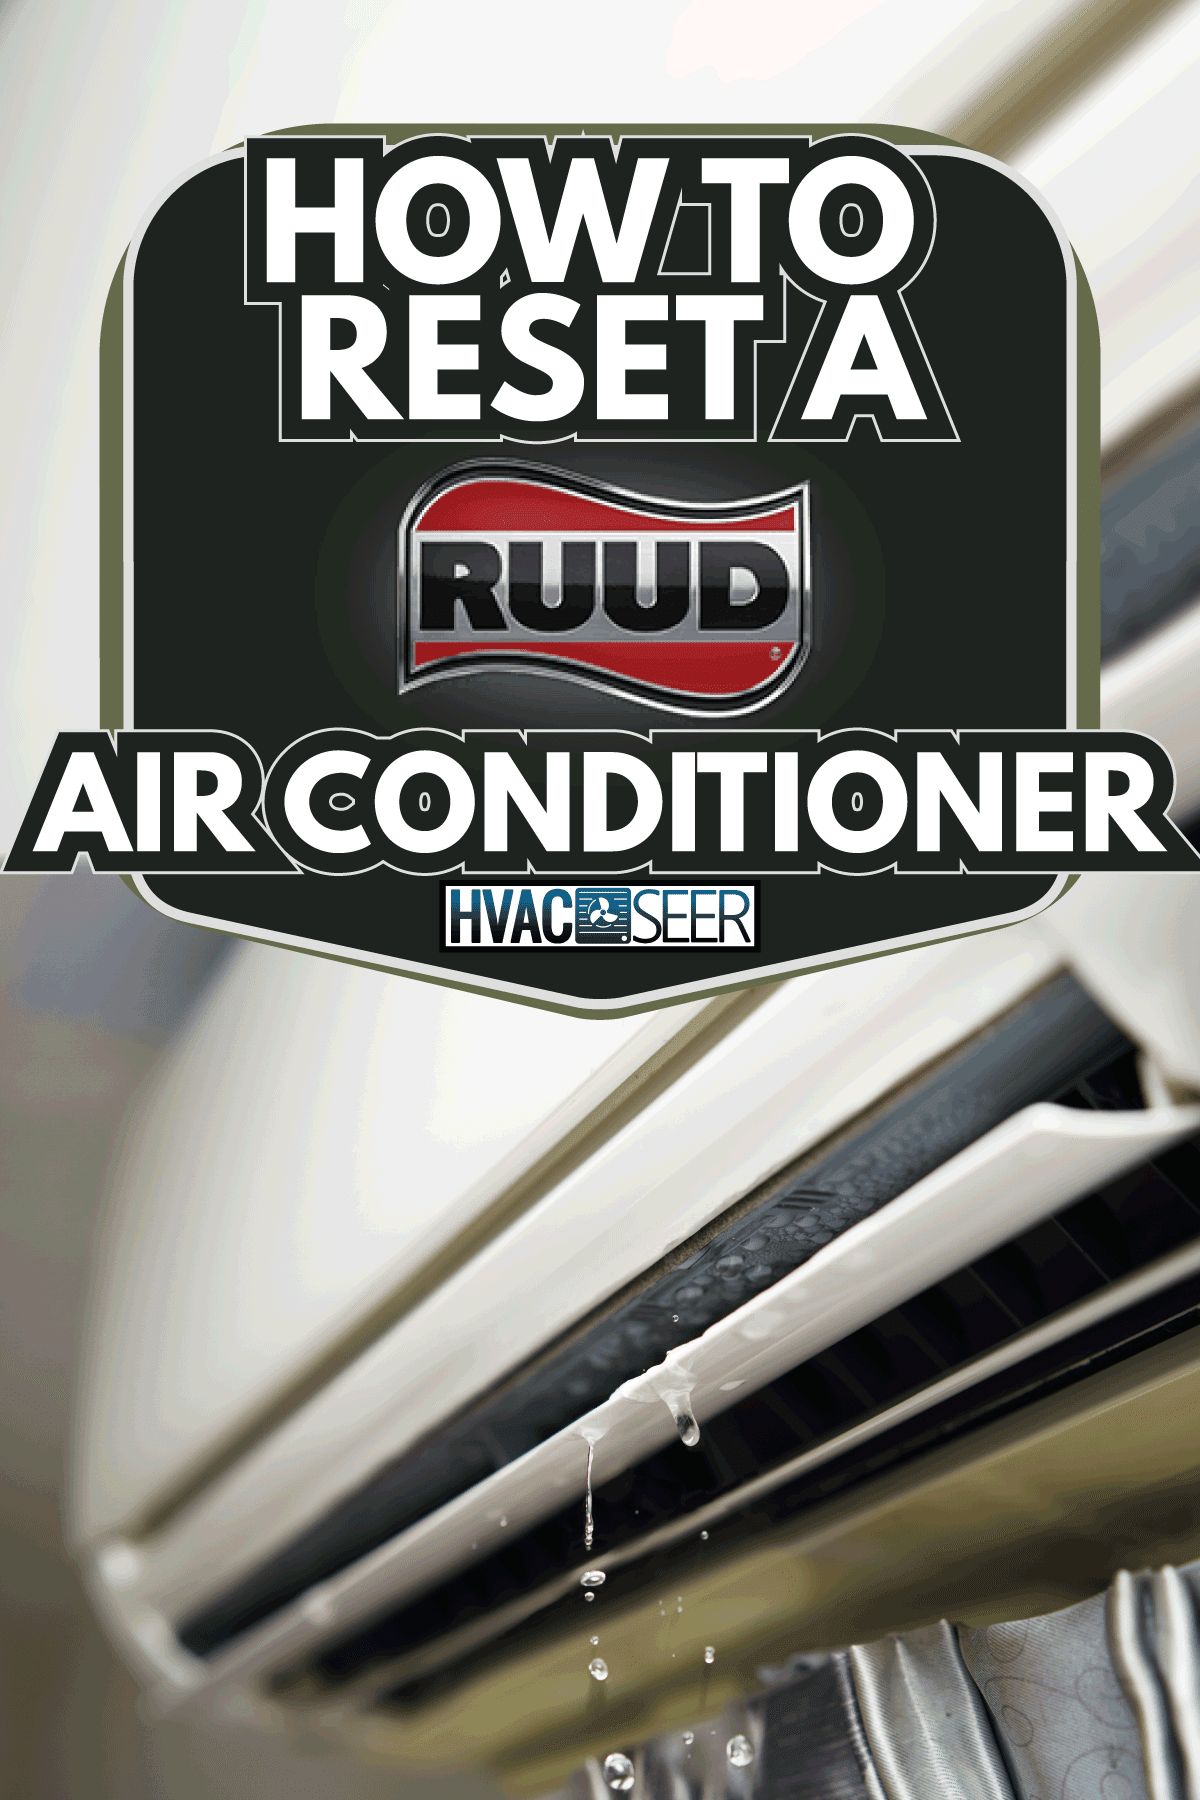 Water leaking from the air conditioner drips from the cooler. How To Reset A Ruud Air Conditioner